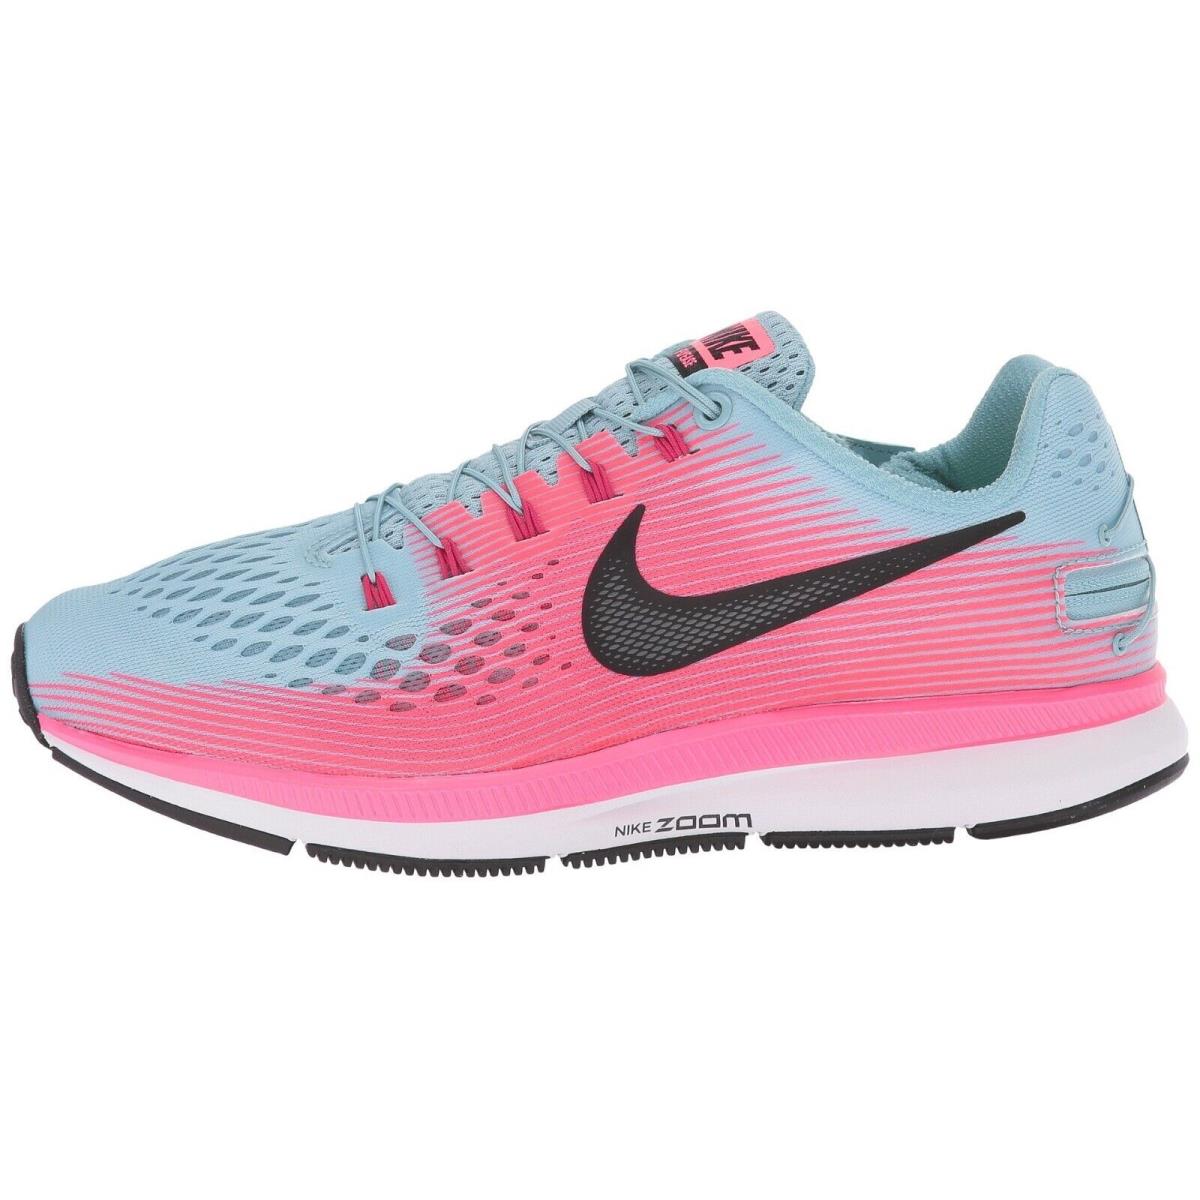 Nike Air Zoom Pegasus 34 Flyease WD Womens Size 5 - 904677-406 Mica Blue Pink - Blue, way: MICA BLUE/BLACK-RACER PINK-SPORT FUCHSIA